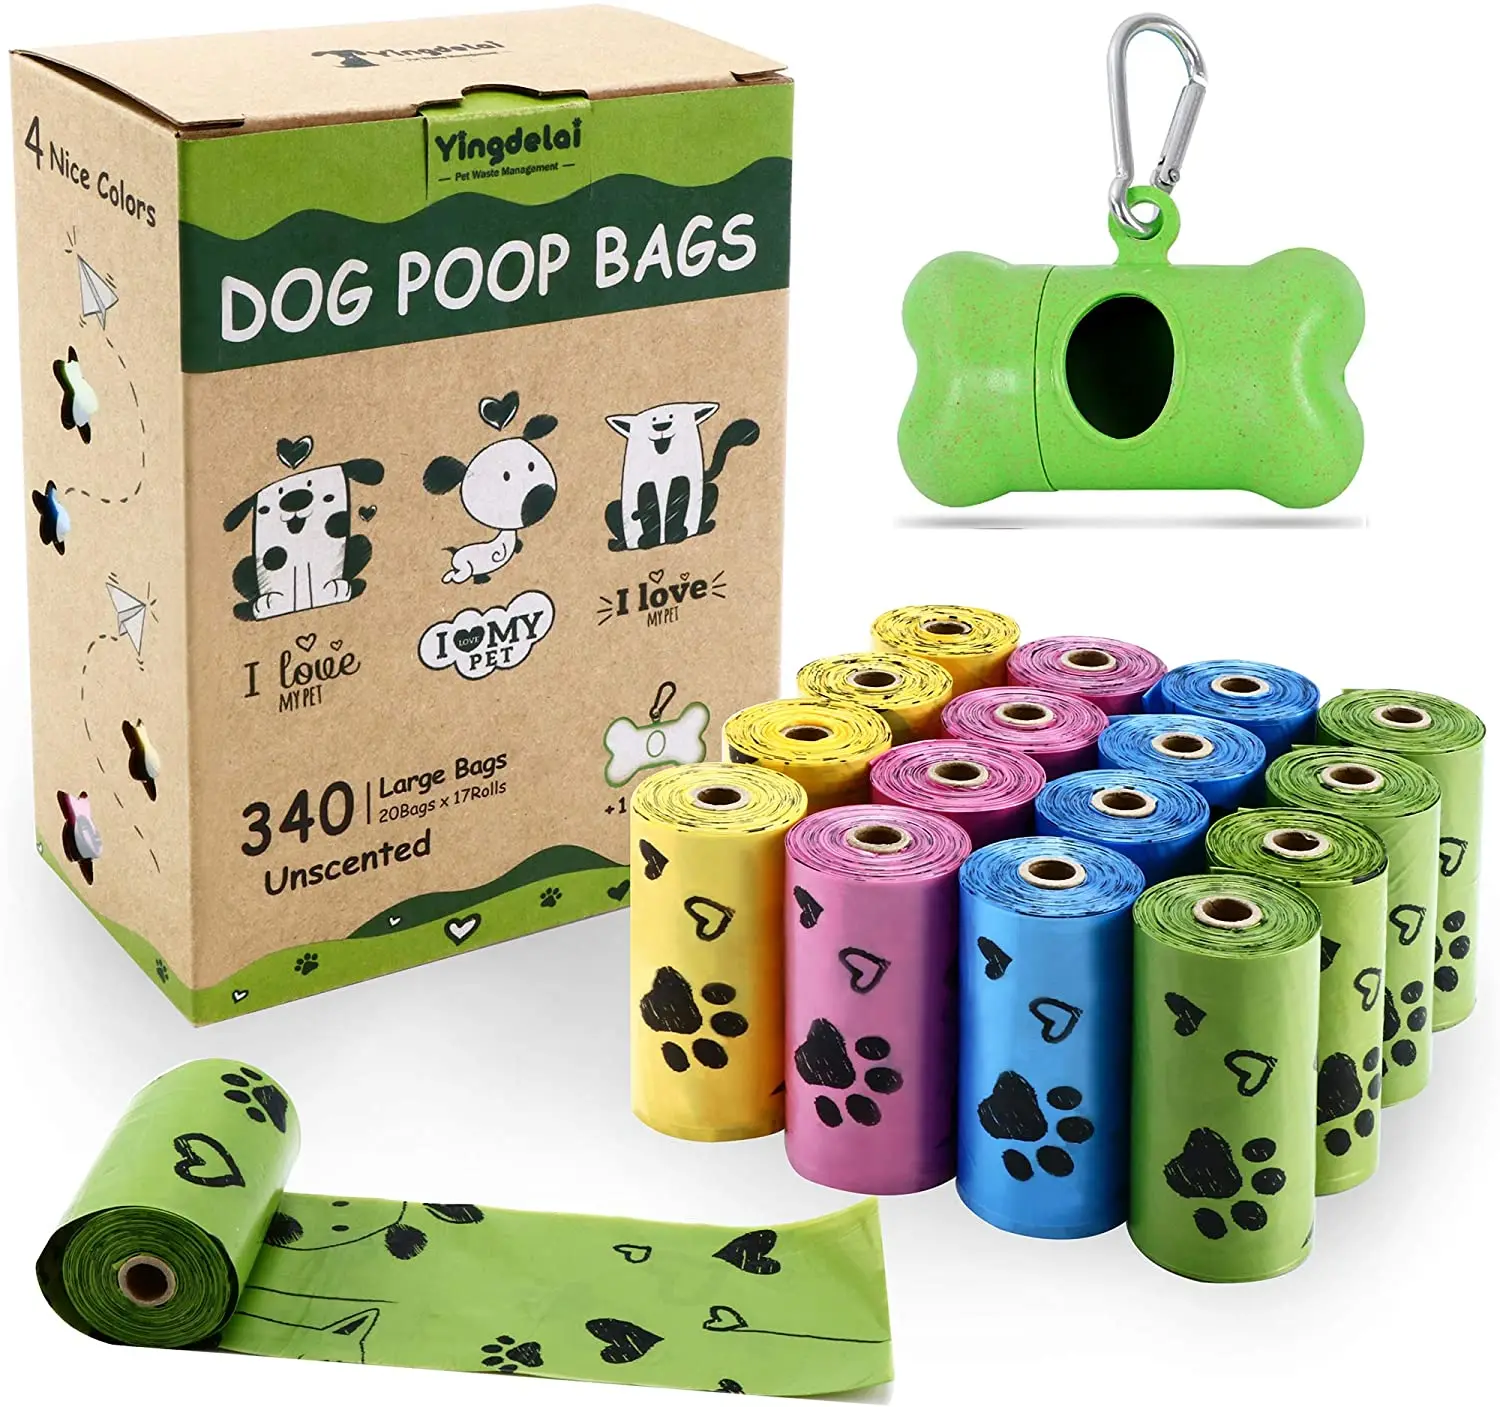 

Corn starch compostable dog poo bags private label wholesale dog waste bag bio degradable poop bags, Customized color